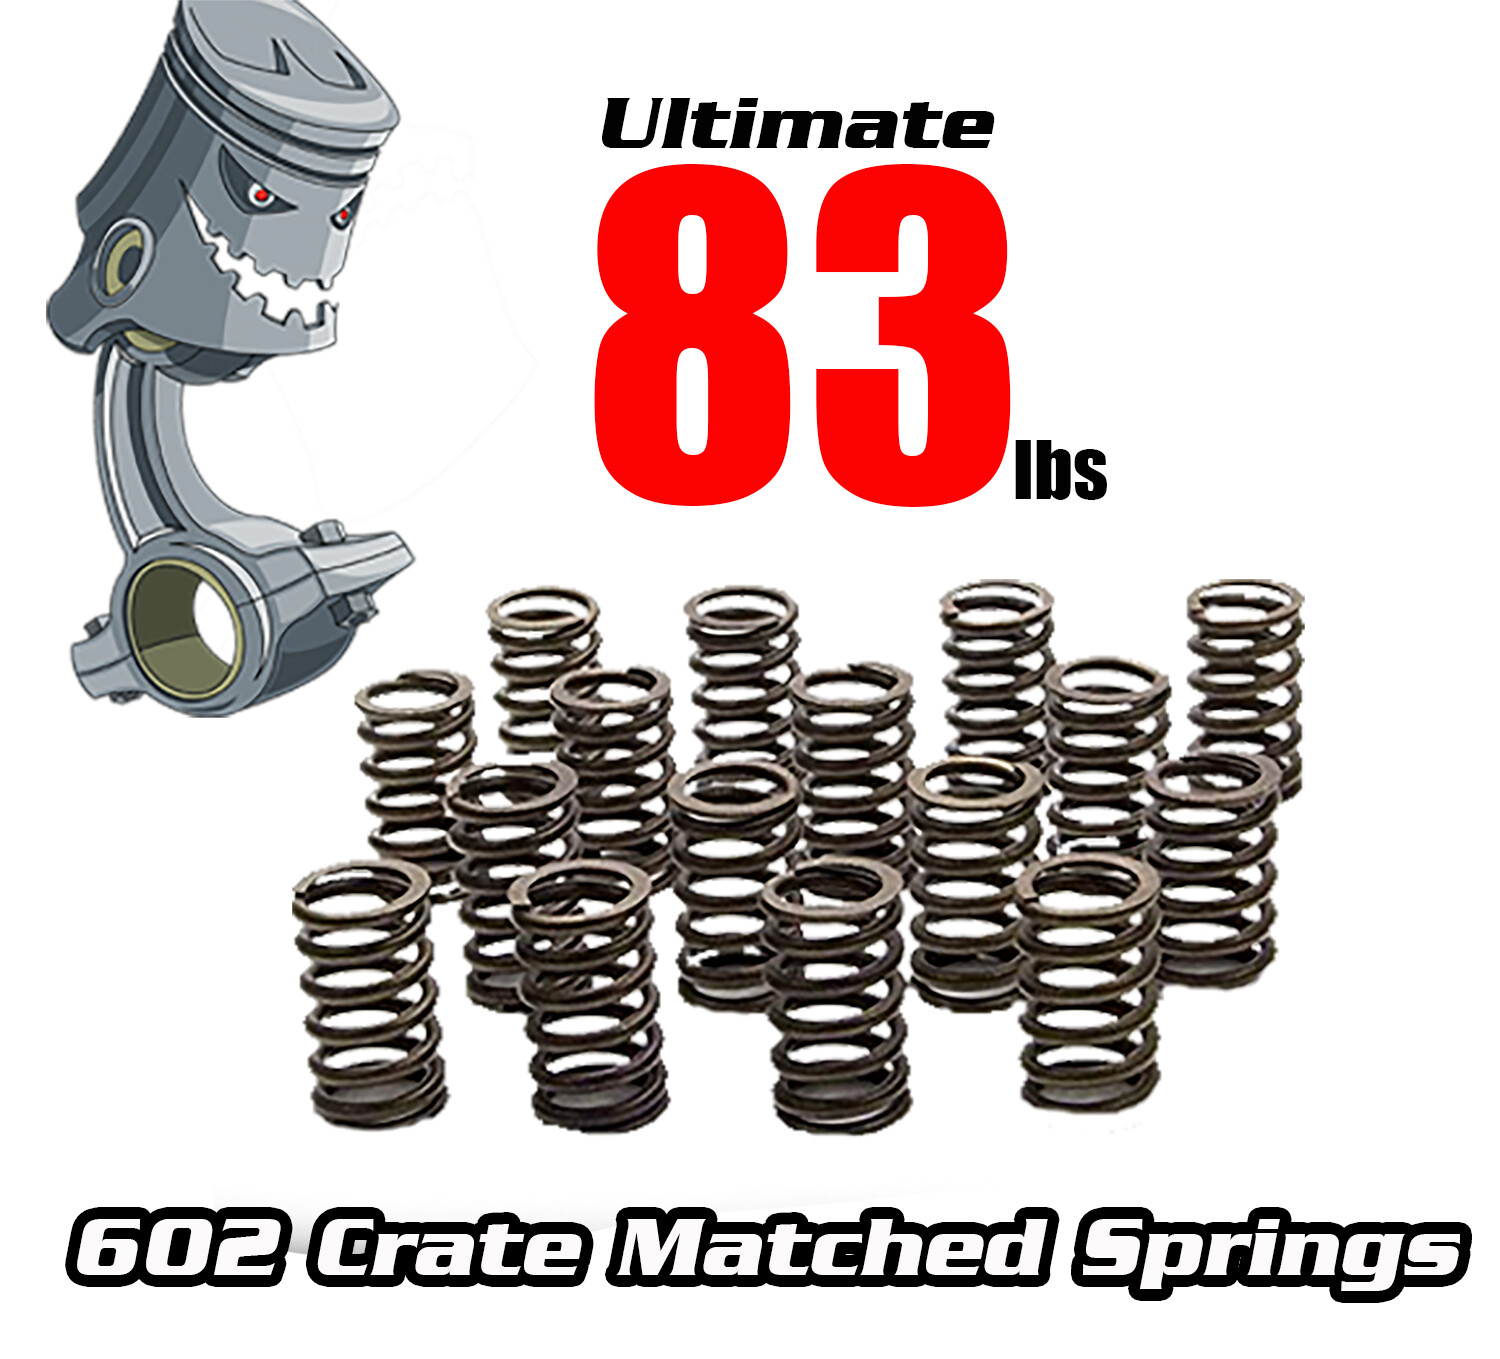 PRE-ORDER Premium 83lb+ Matched Valve Springs for 602 Crate